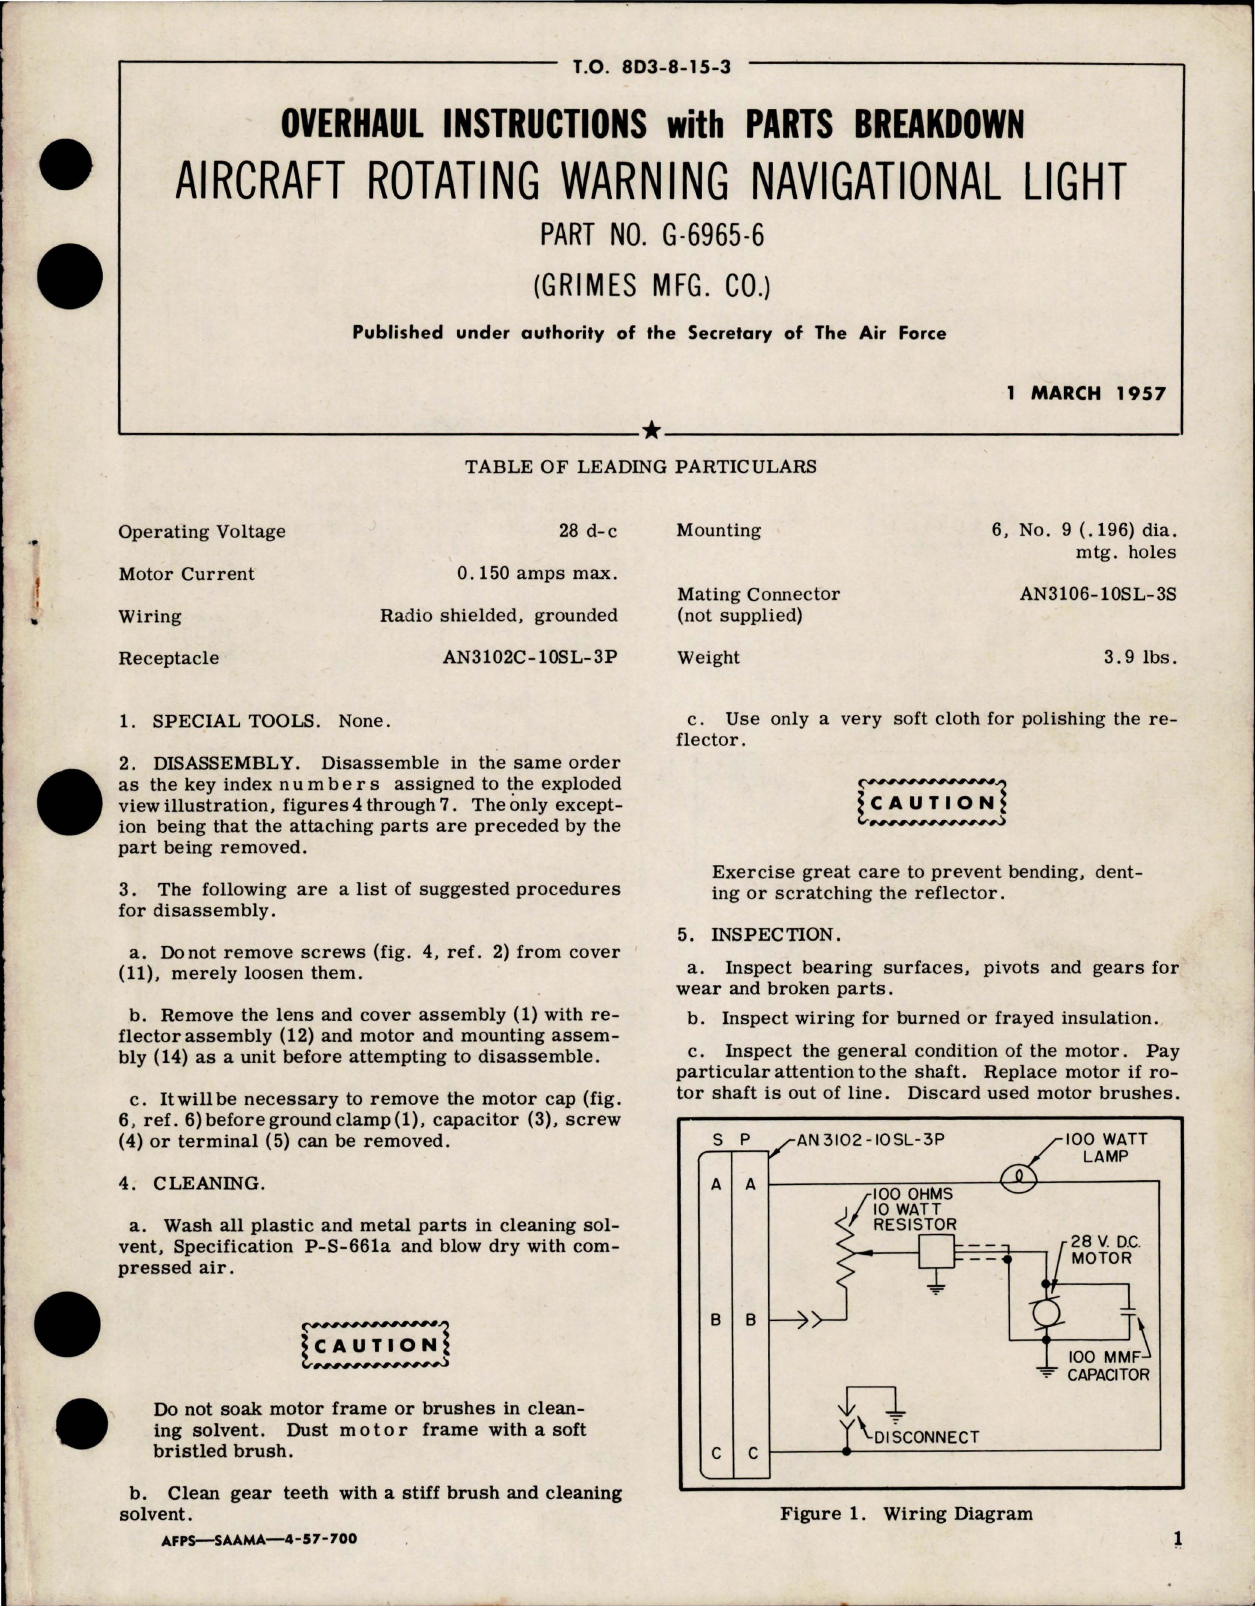 Sample page 1 from AirCorps Library document: Overhaul Instructions with Parts for Rotating Warning Navigational Light - Part G-6965-6 